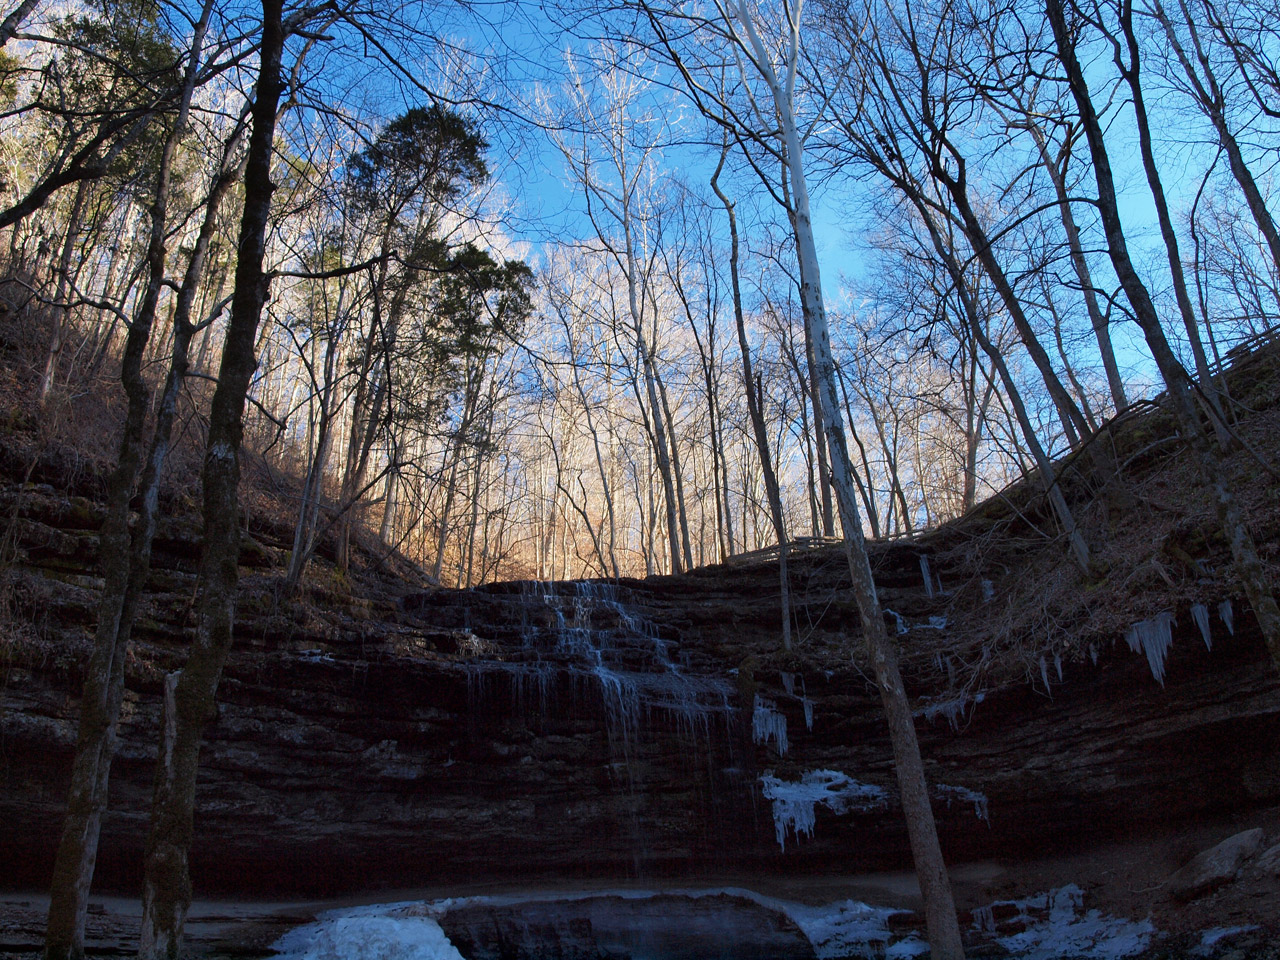 Stillhouse Hollow Falls State Nature Area is located along HW 43 south of Mount Pleasant, TN